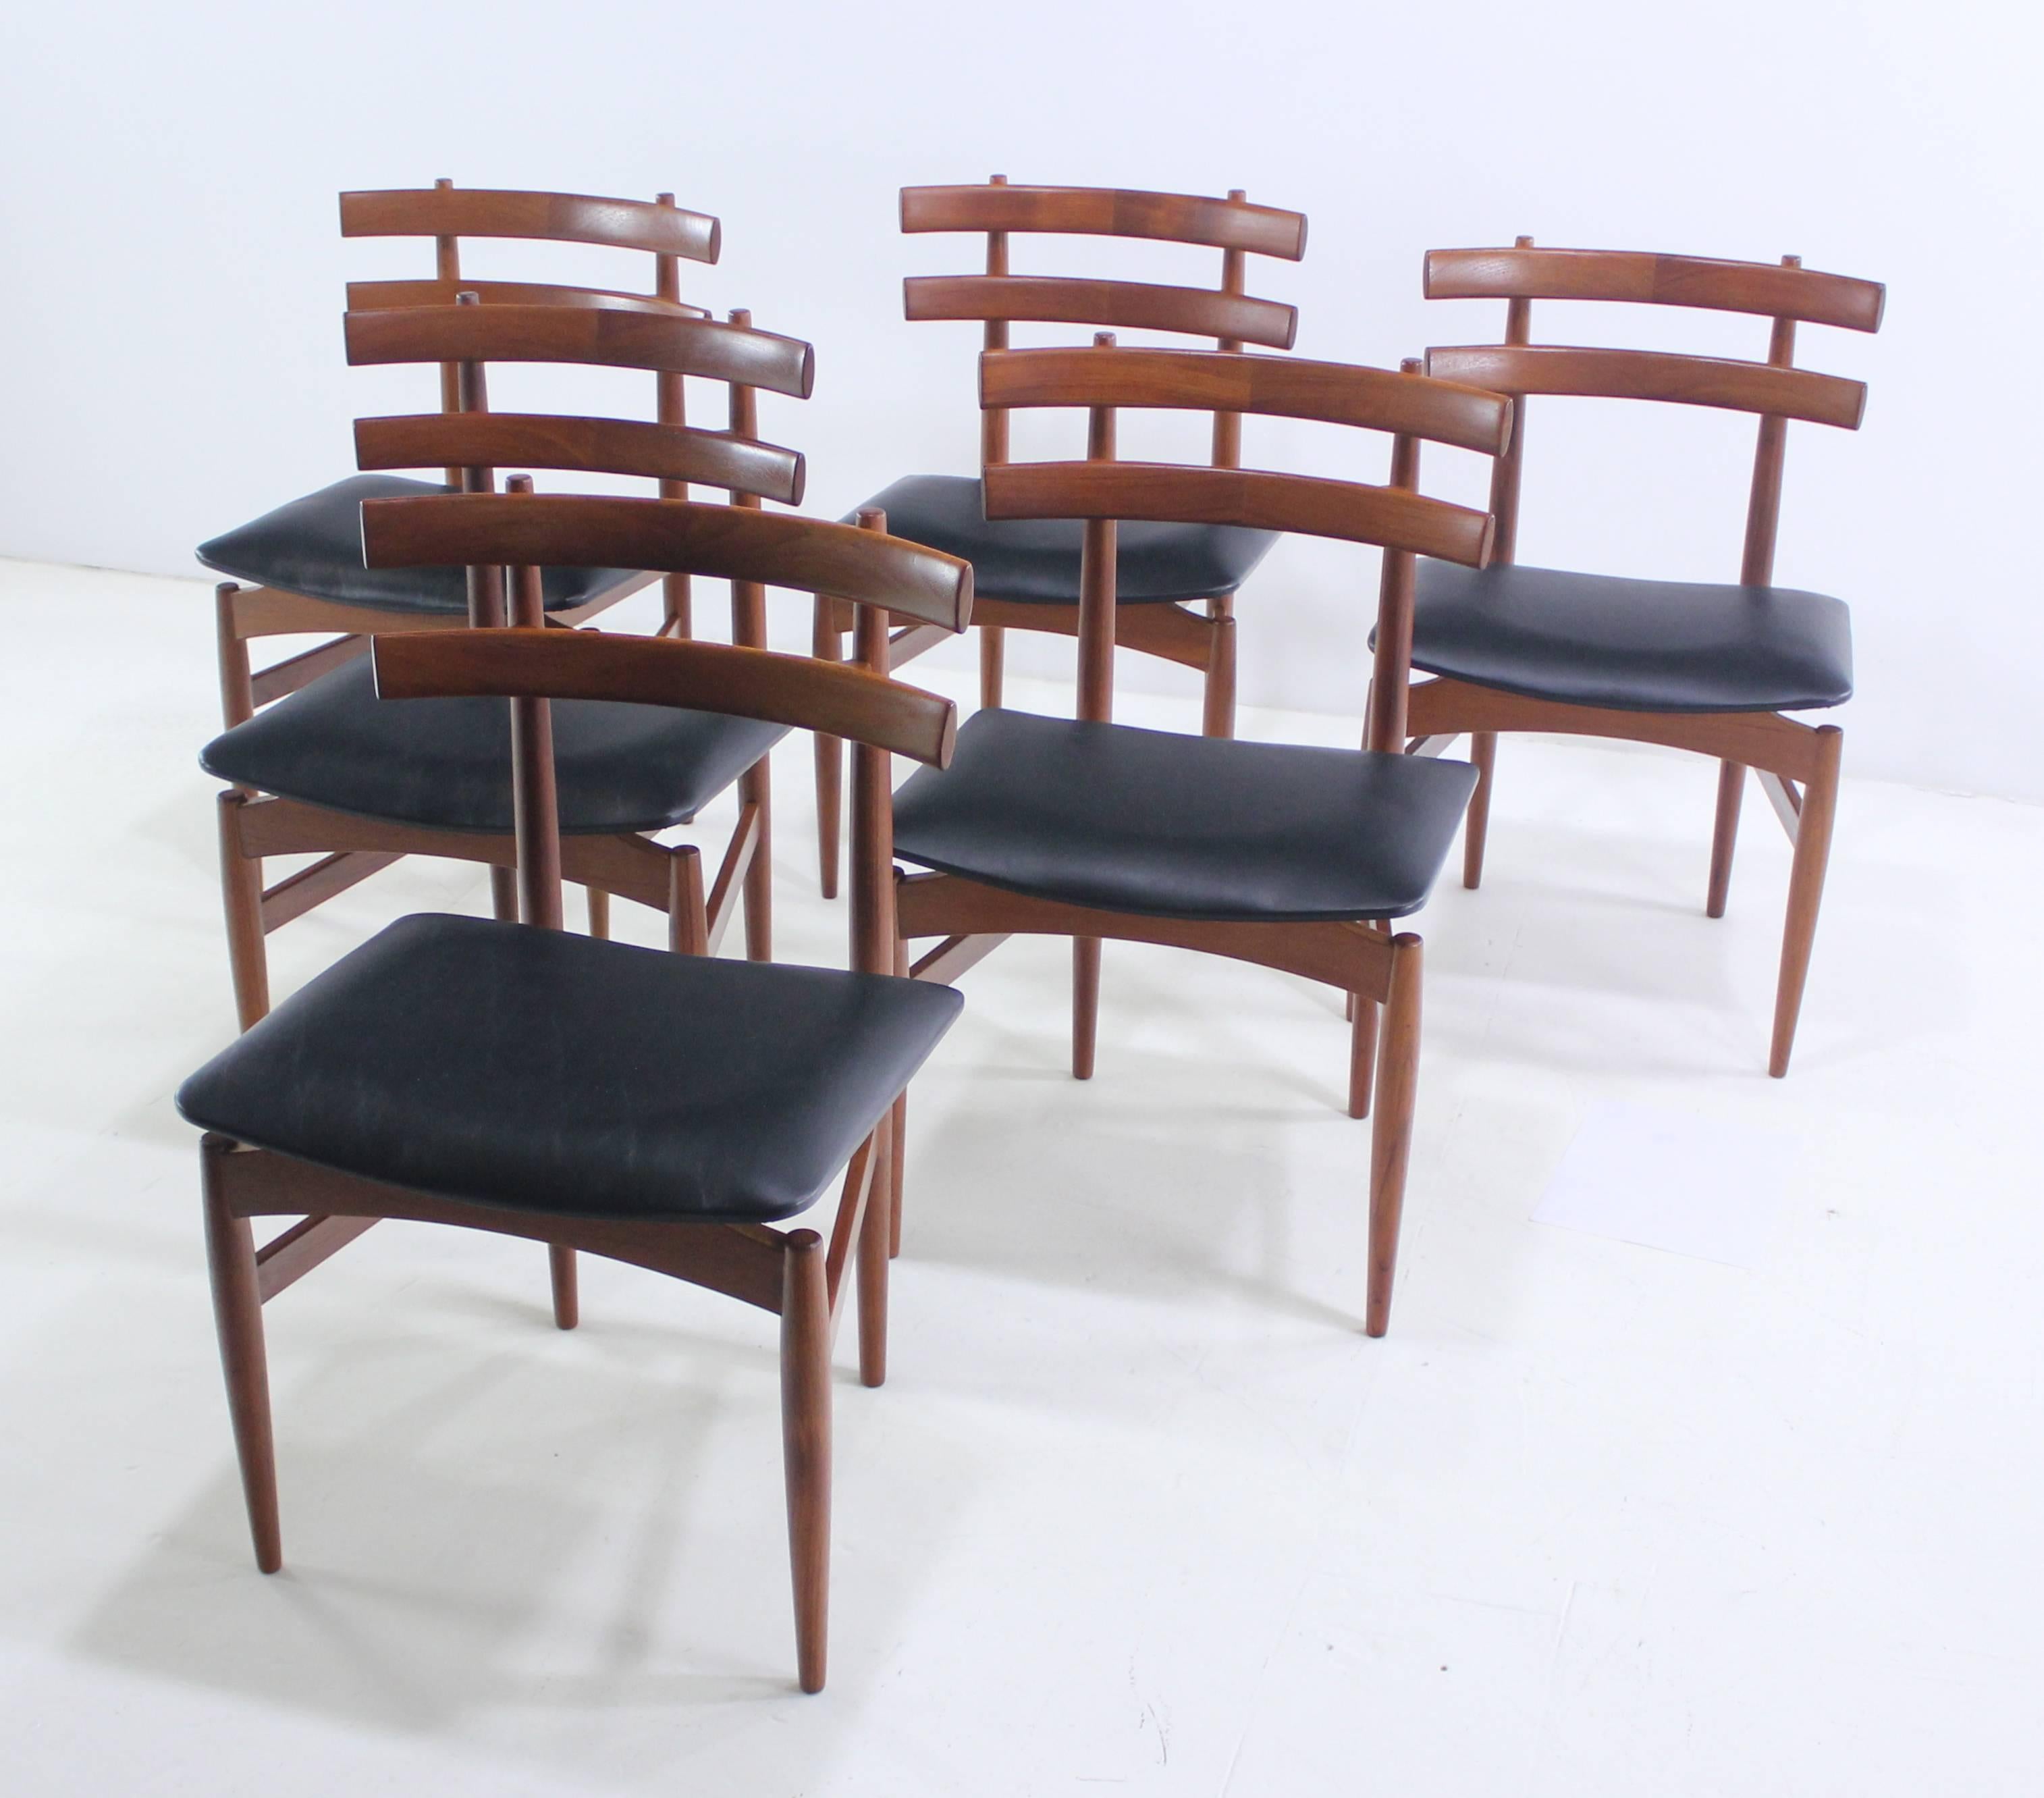 Six Danish modern chairs designed by Poul Hundevad. Model #30.
Rich teak frames with beautifully sculptured and joined ladder backs.
Distinctive in style, craftsmanship and quality.
Floating seats newly upholstered in highest quality black